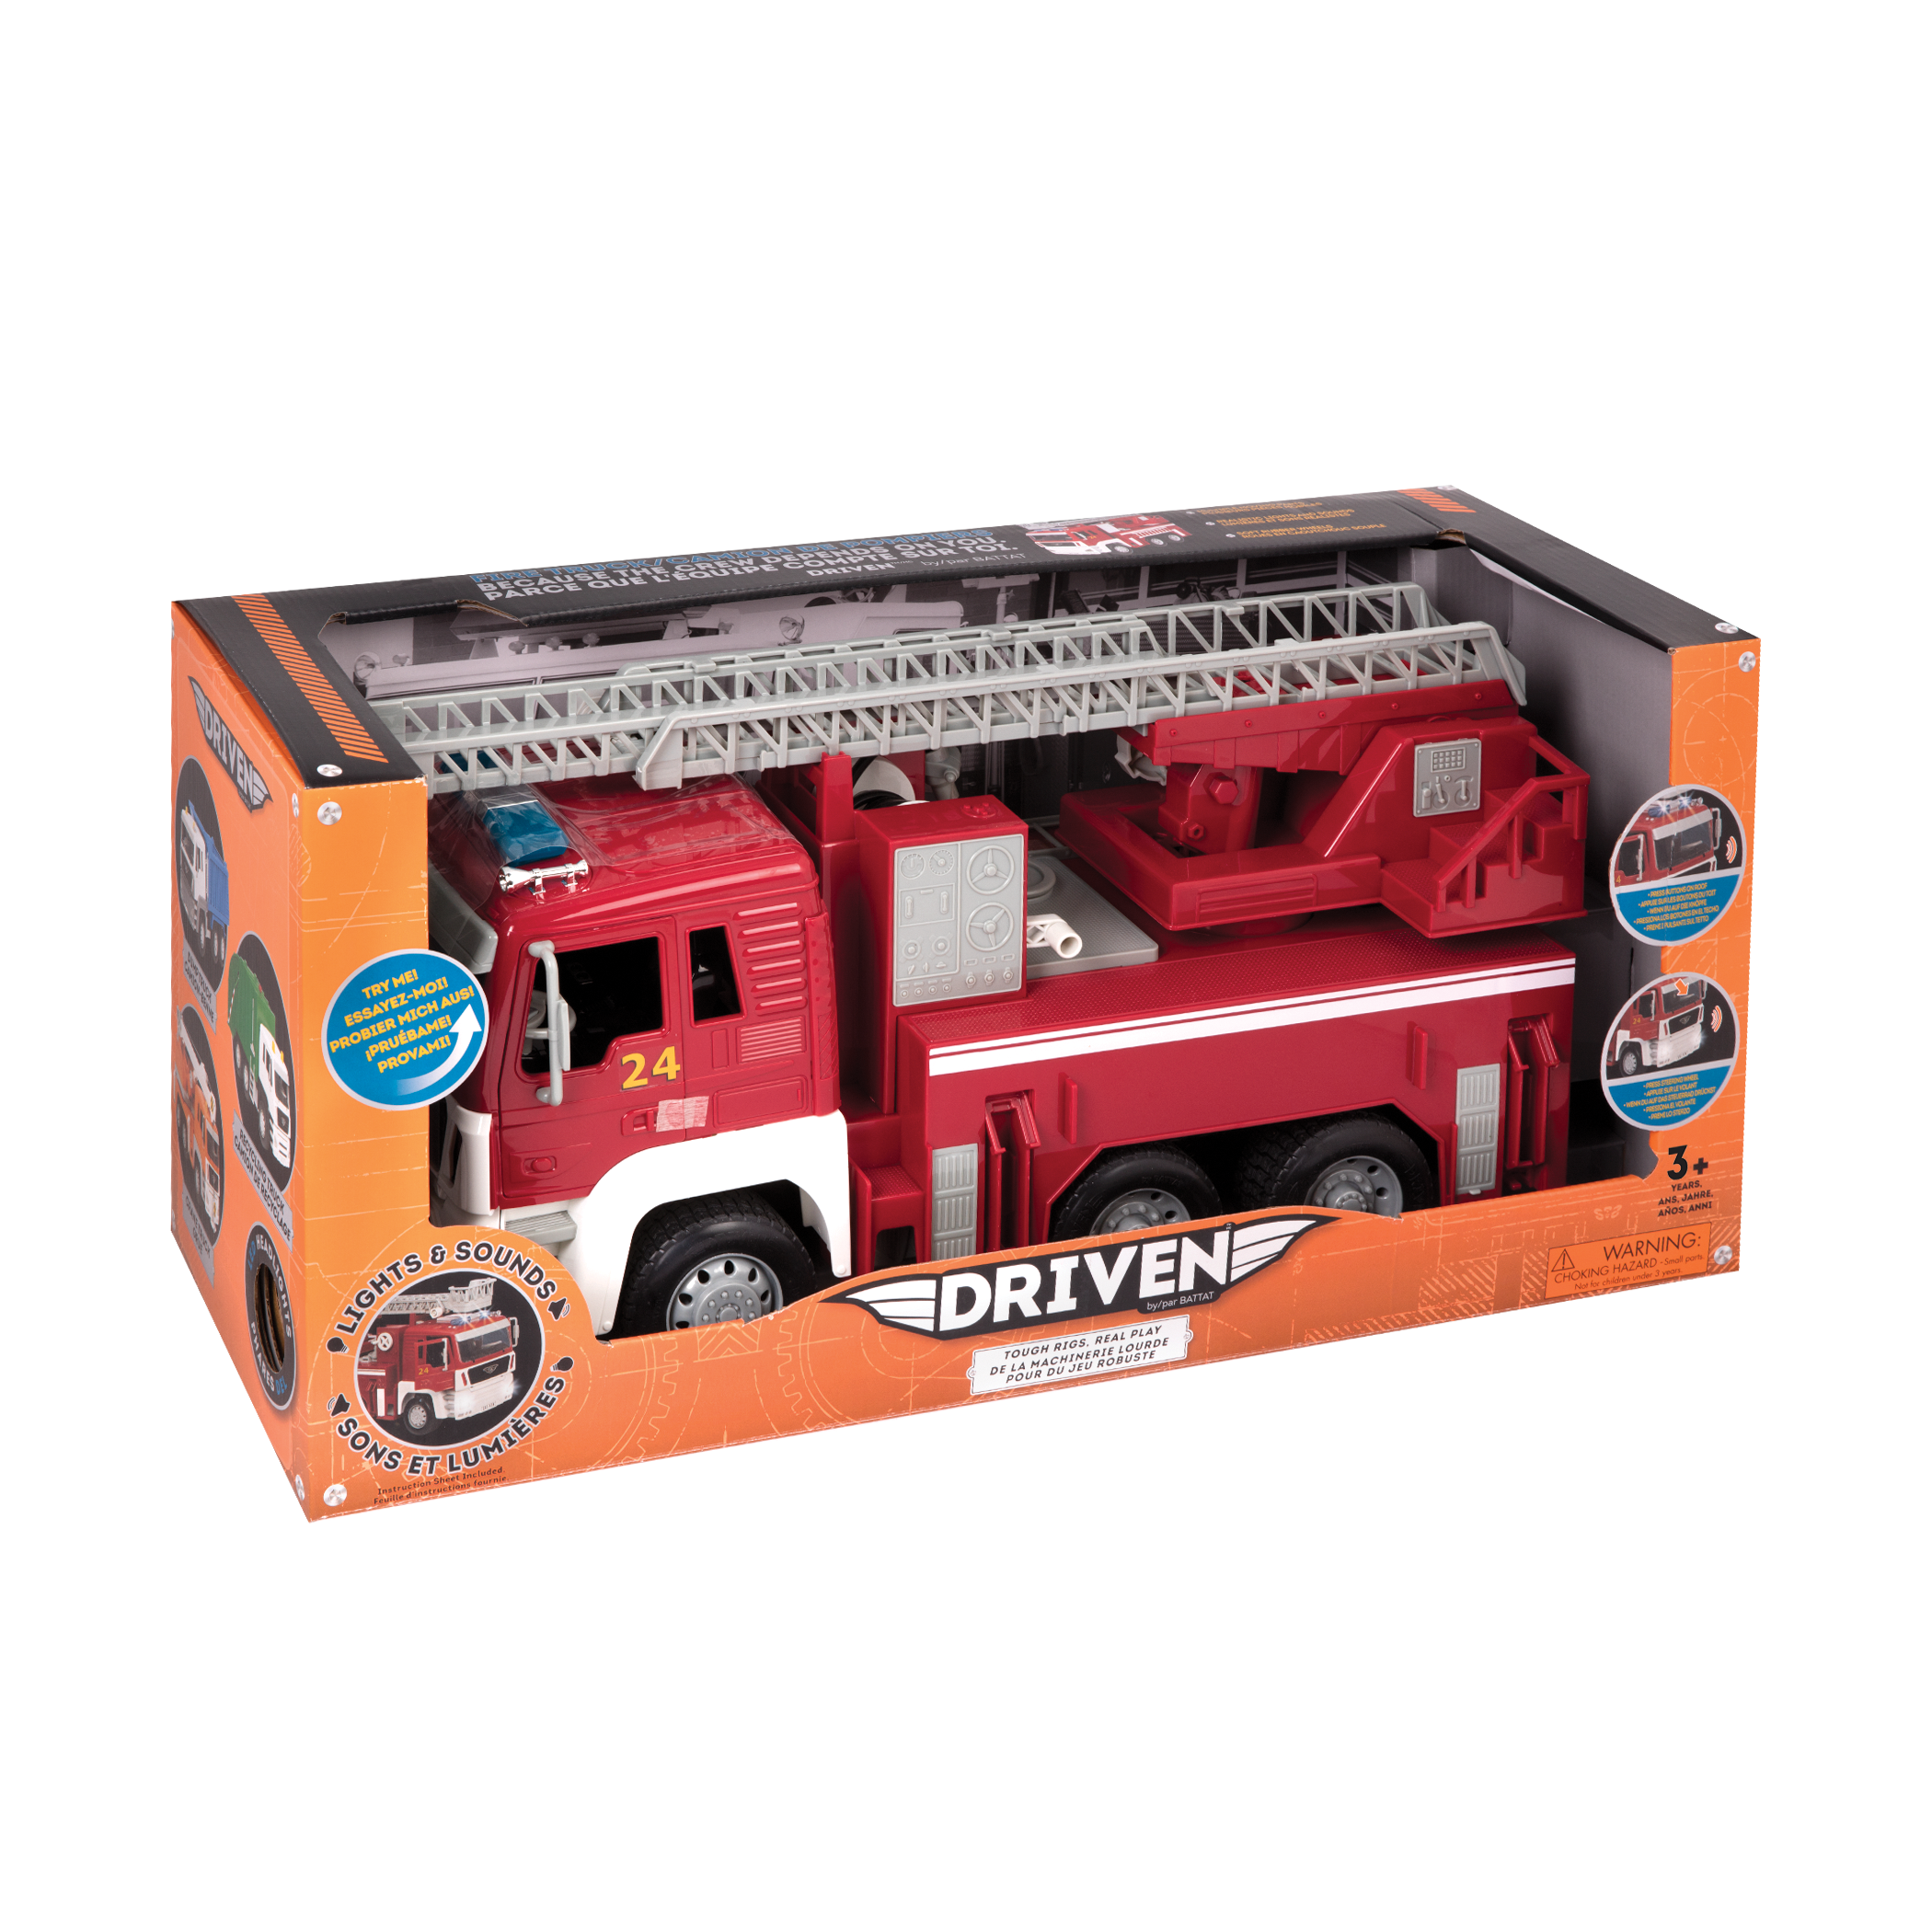 Details about   Yoowon Fire Truck Vehicle Toy Sound Lights Friction Power Construction Extending 